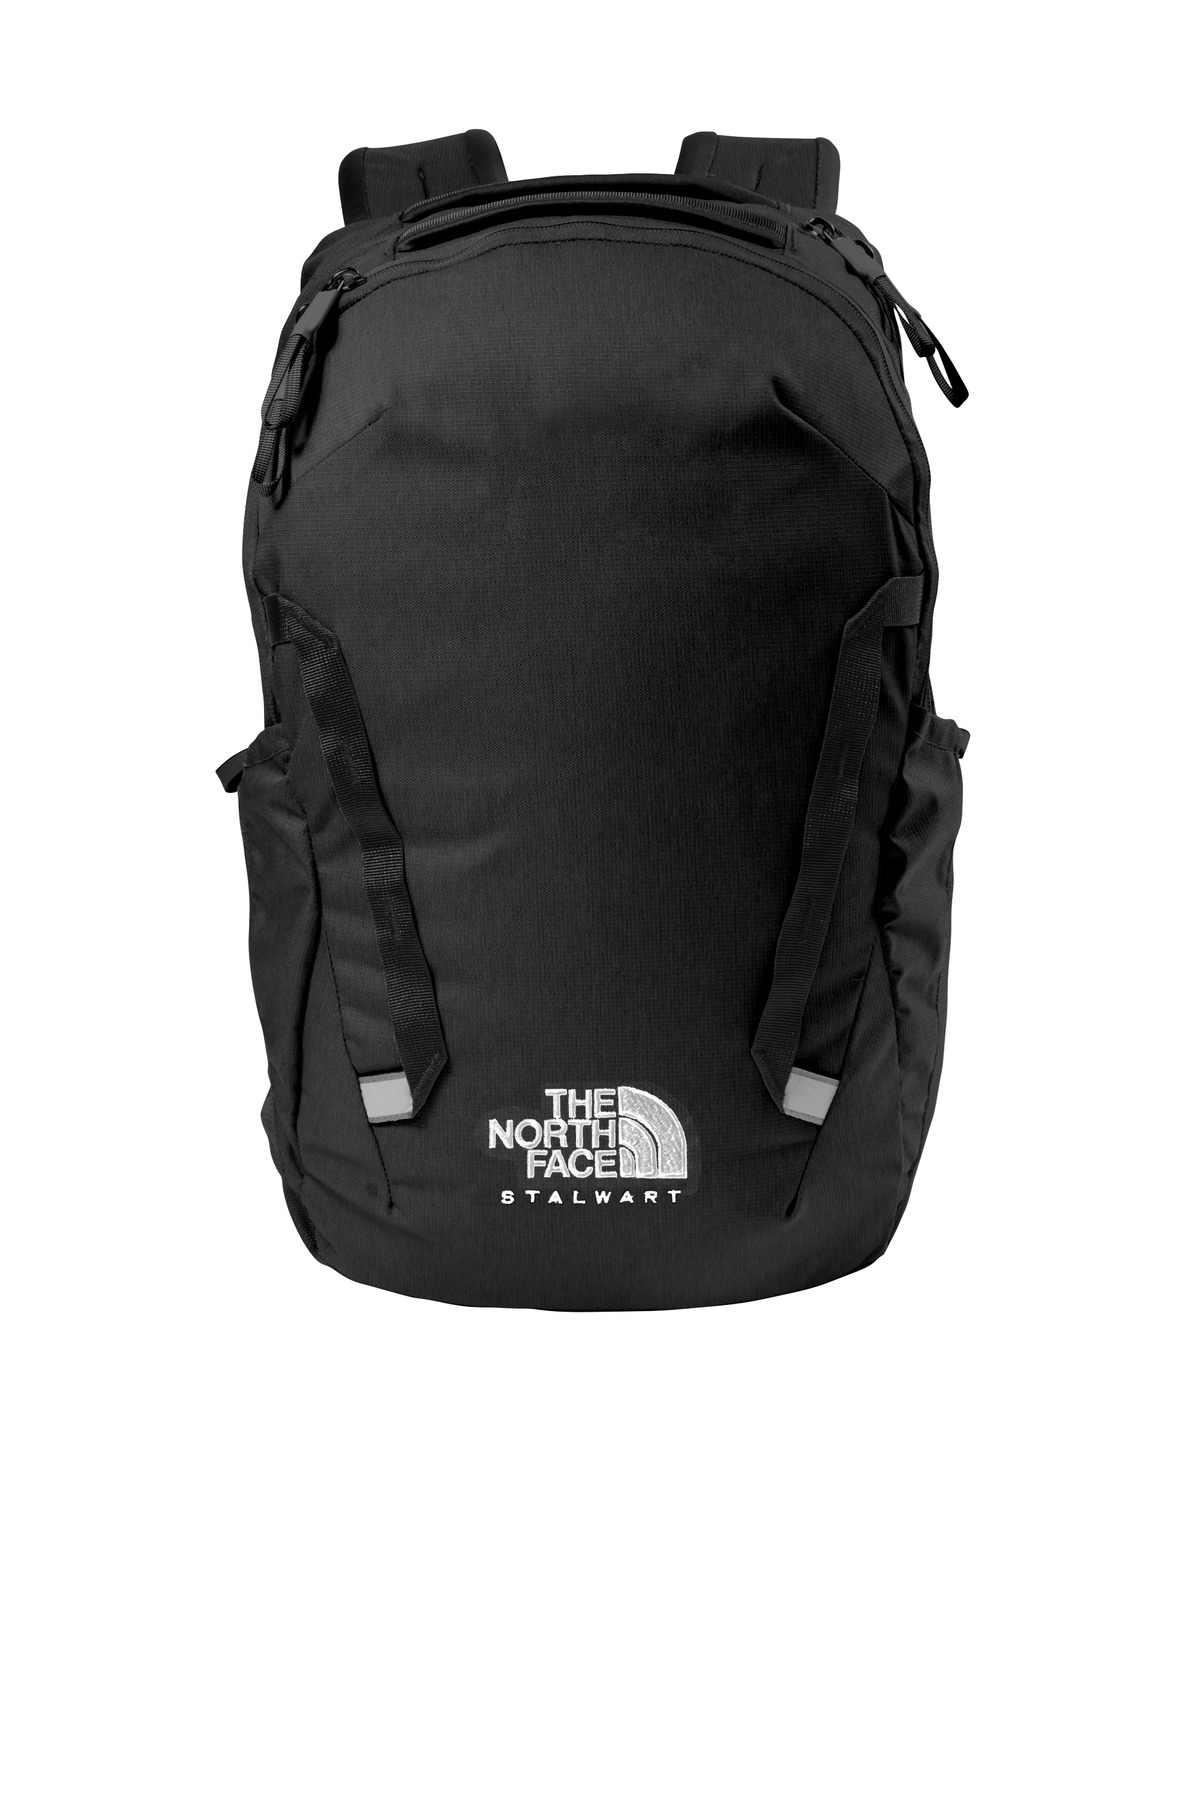 The North Face Stalwart Backpack-The North Face